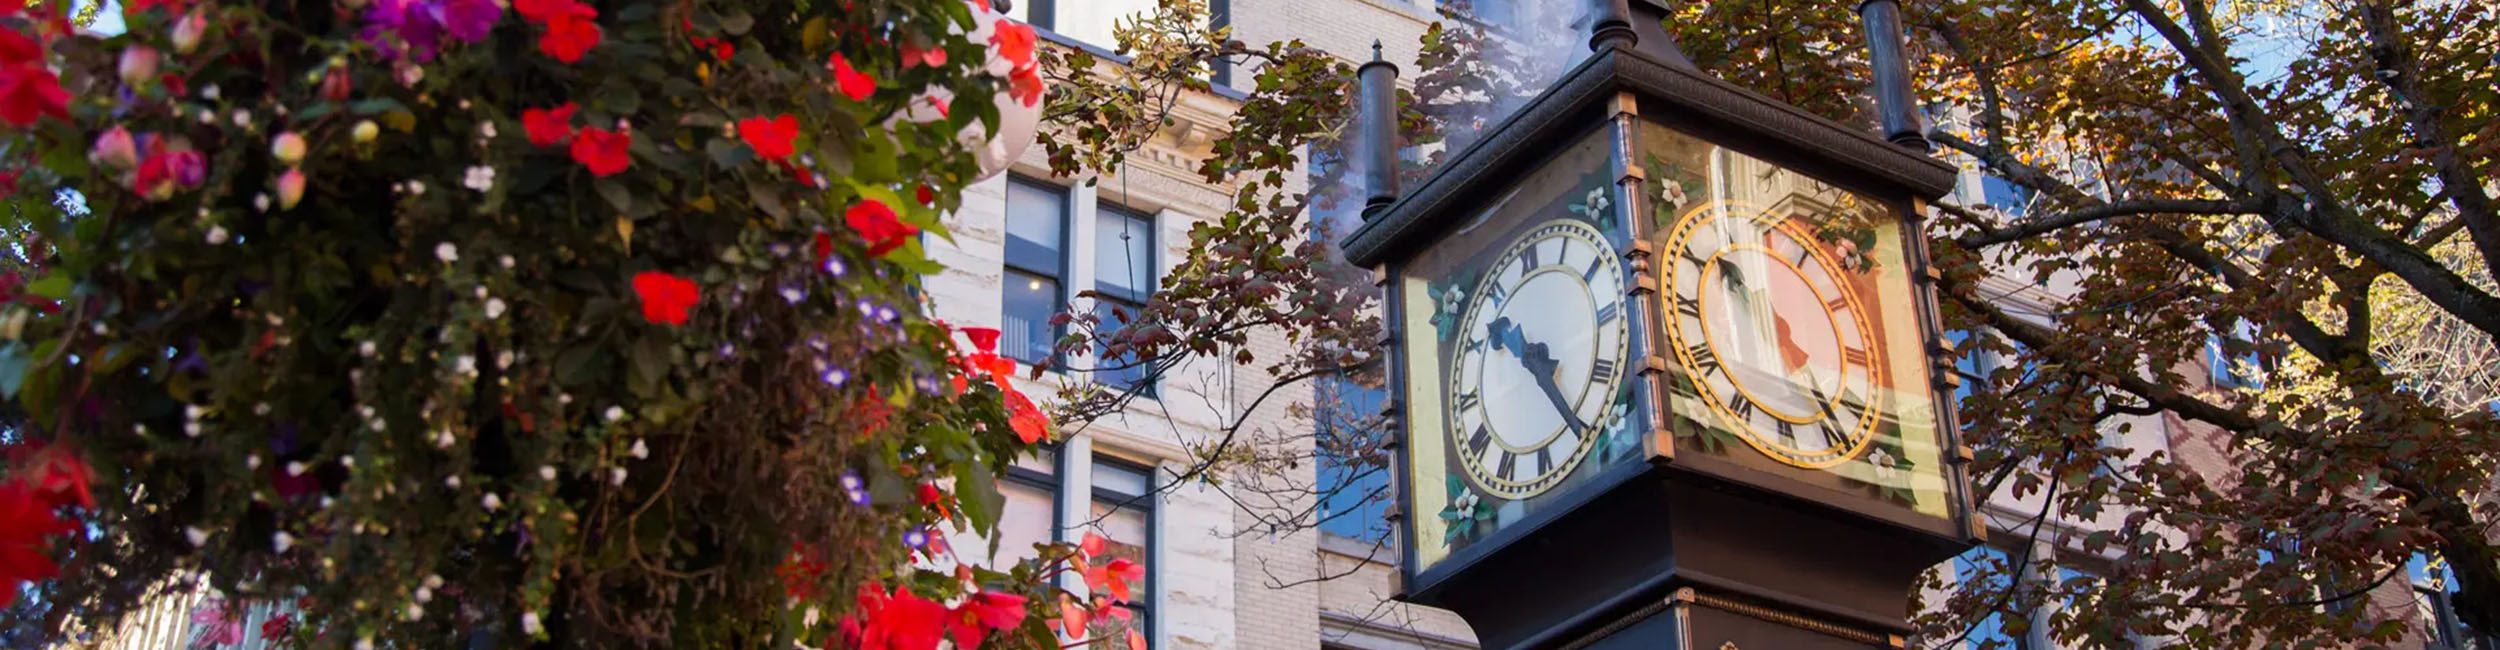 Gastown's iconic steam clock and some foliage